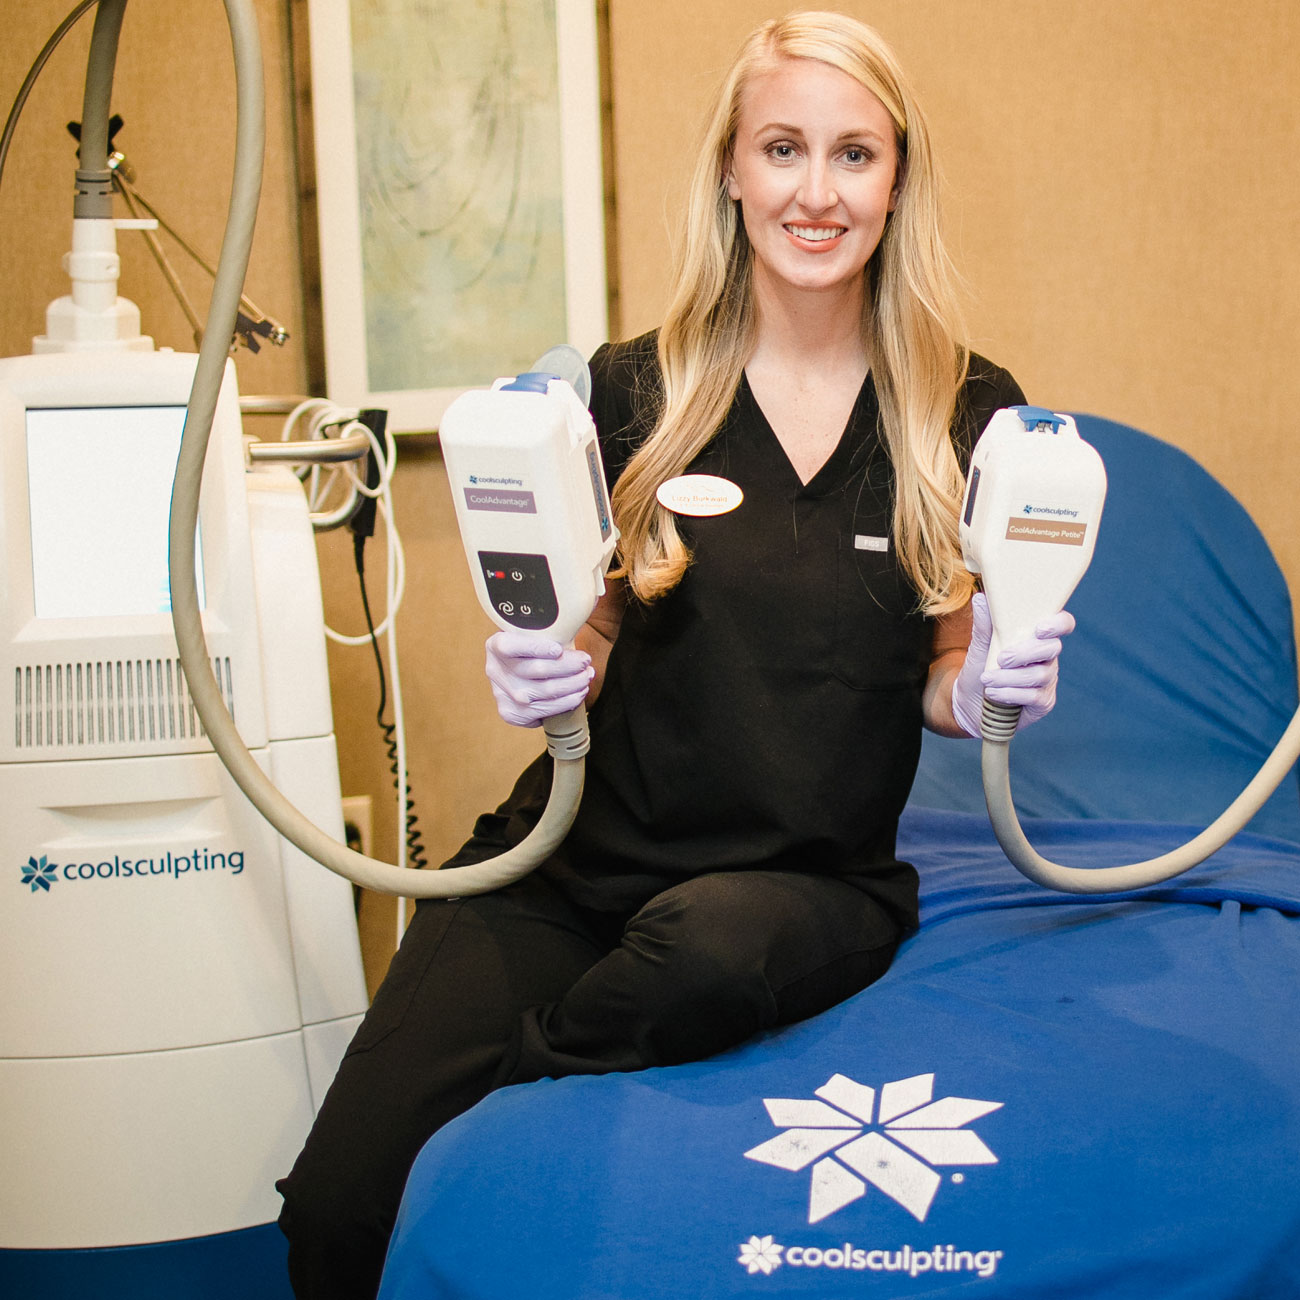 CoolSculpting & Body Services from Refresh Aesthetic Center, Whitefish Bay WI